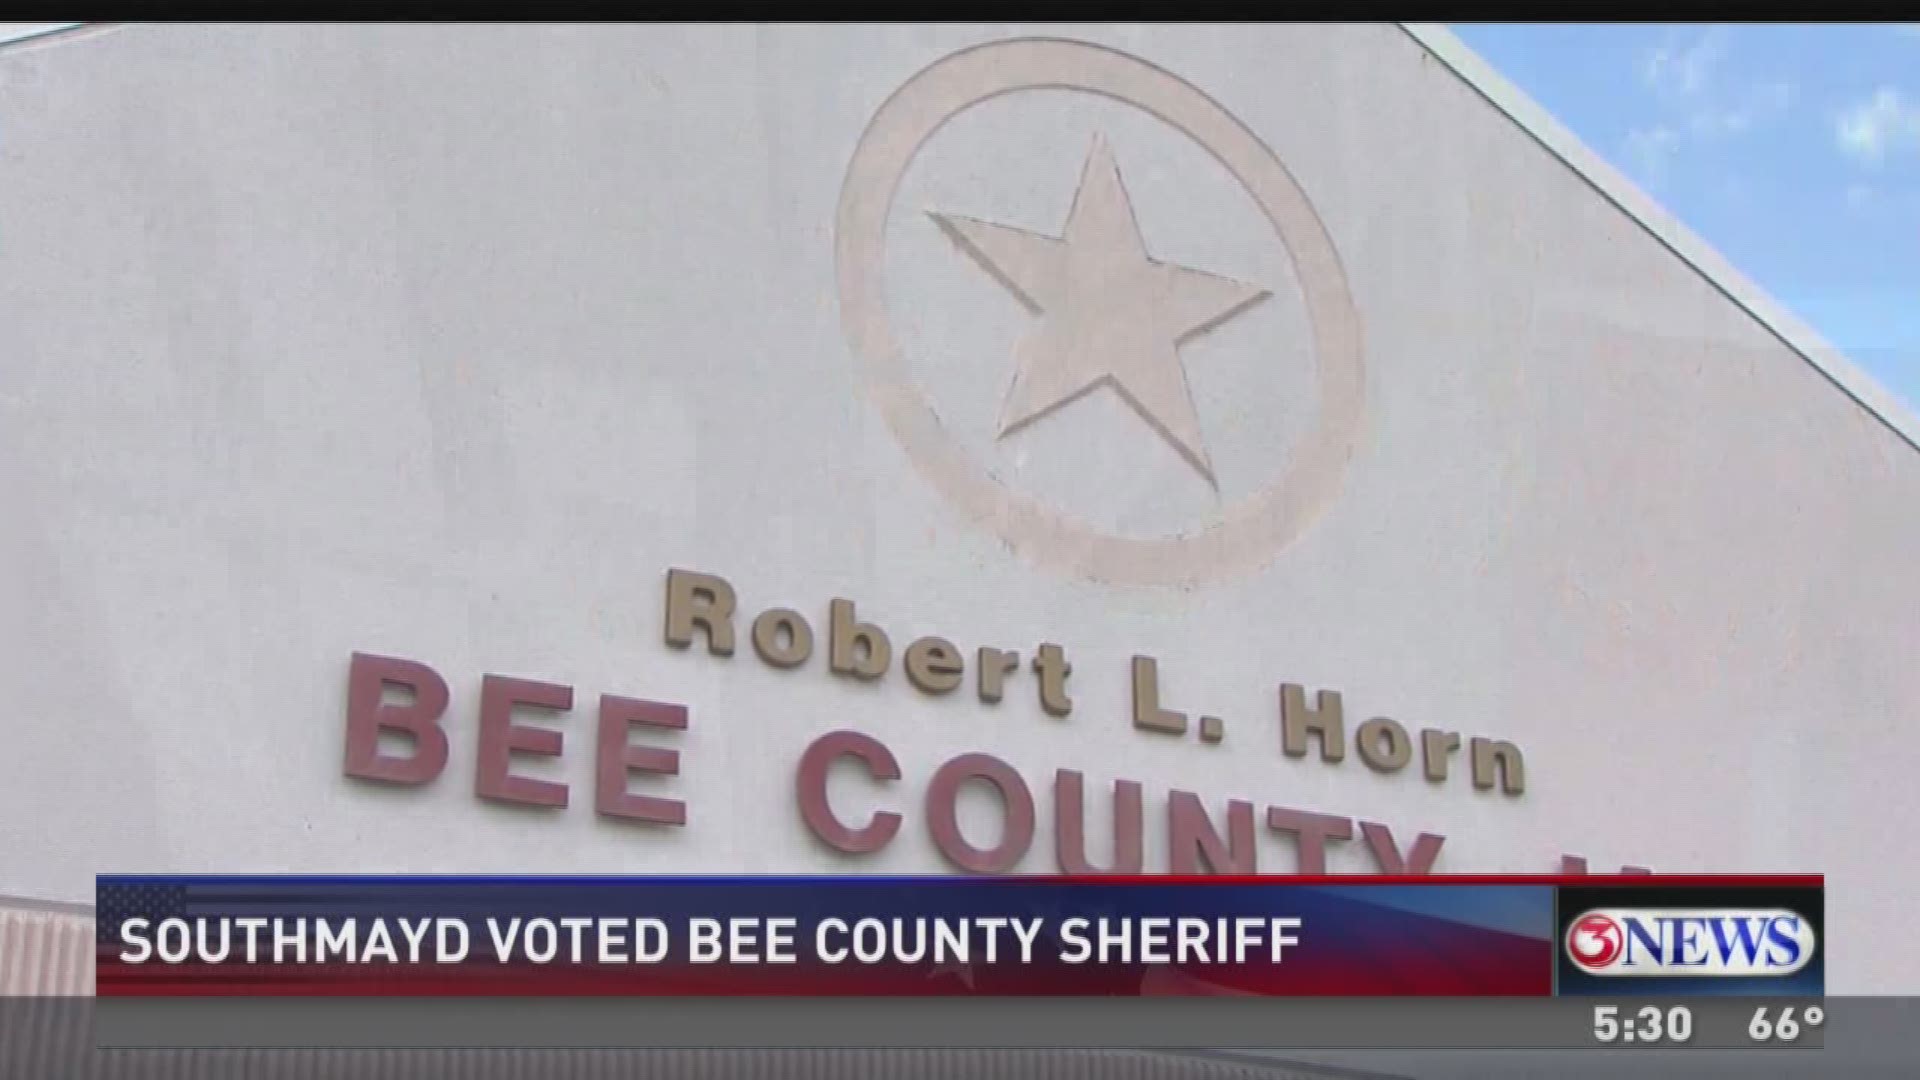 Interim sheriff Alden Southmayd has been voted in as the permanent head of law enforcement in Bee County. 